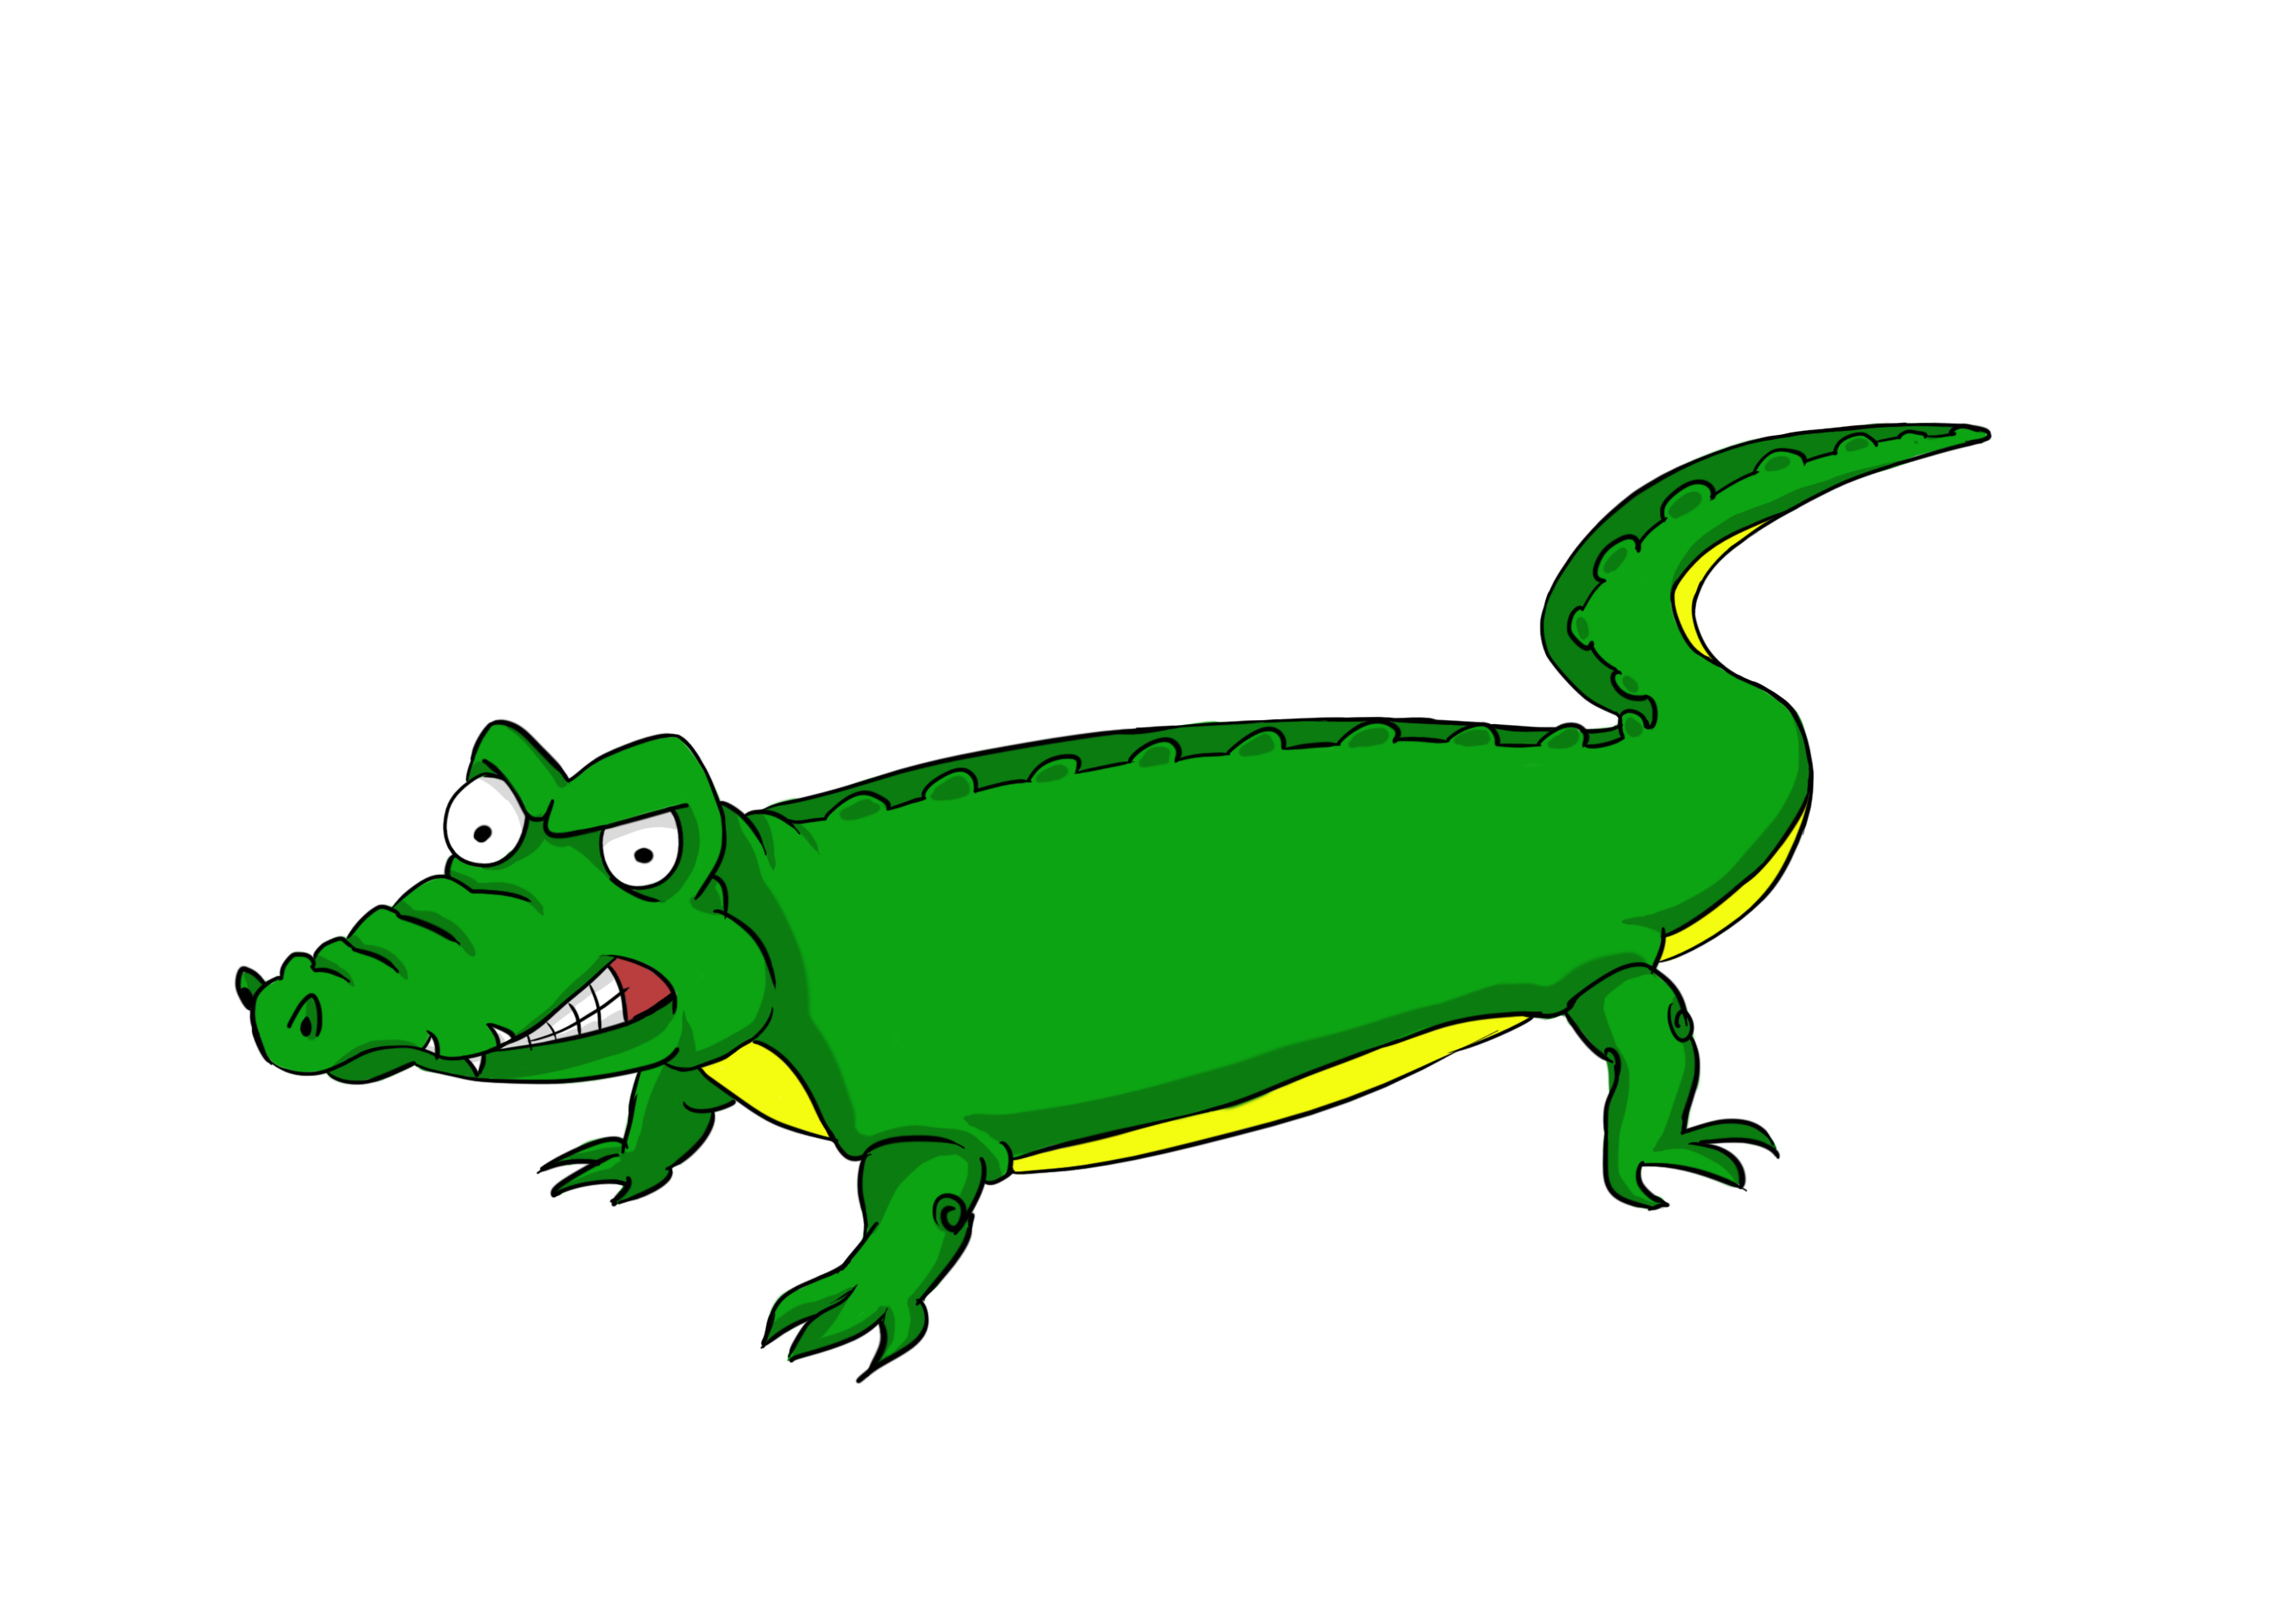 Crocodile in water clipart free clipart images